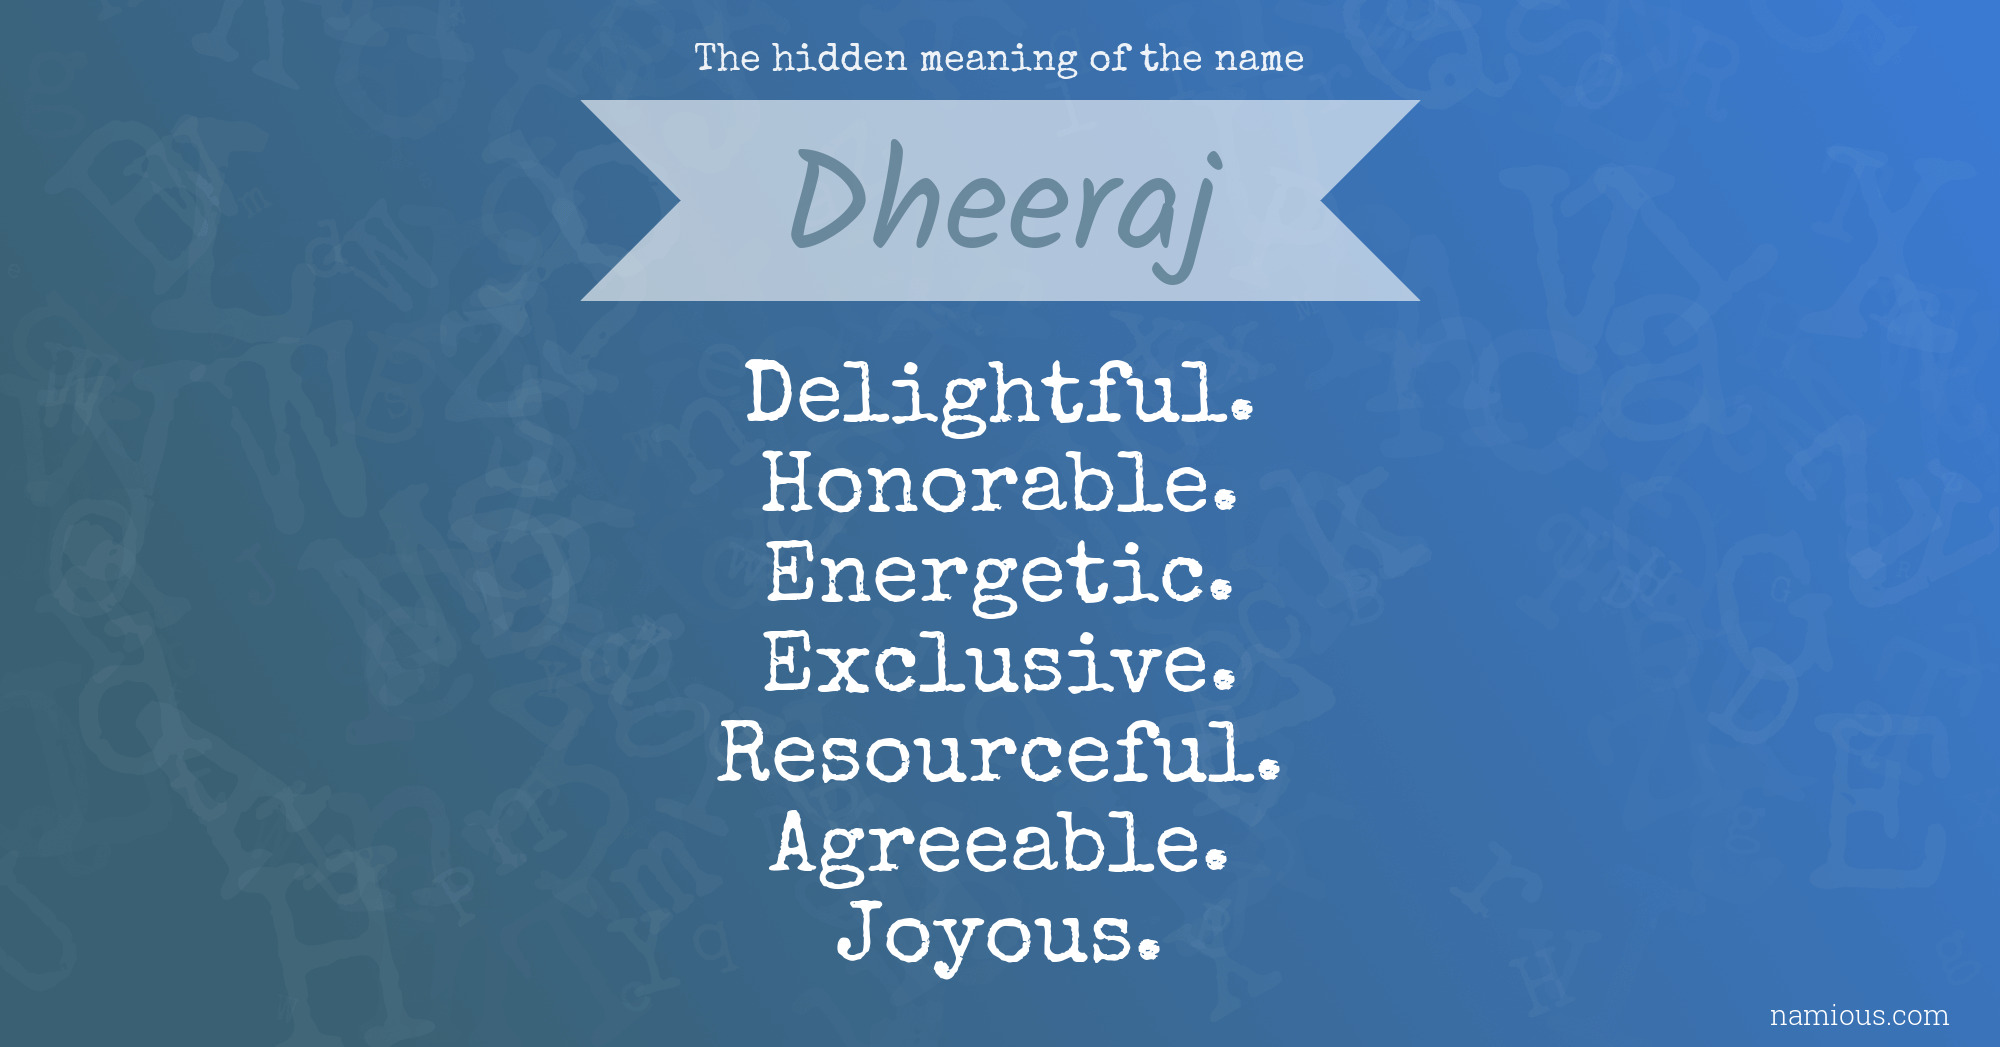 The hidden meaning of the name Dheeraj